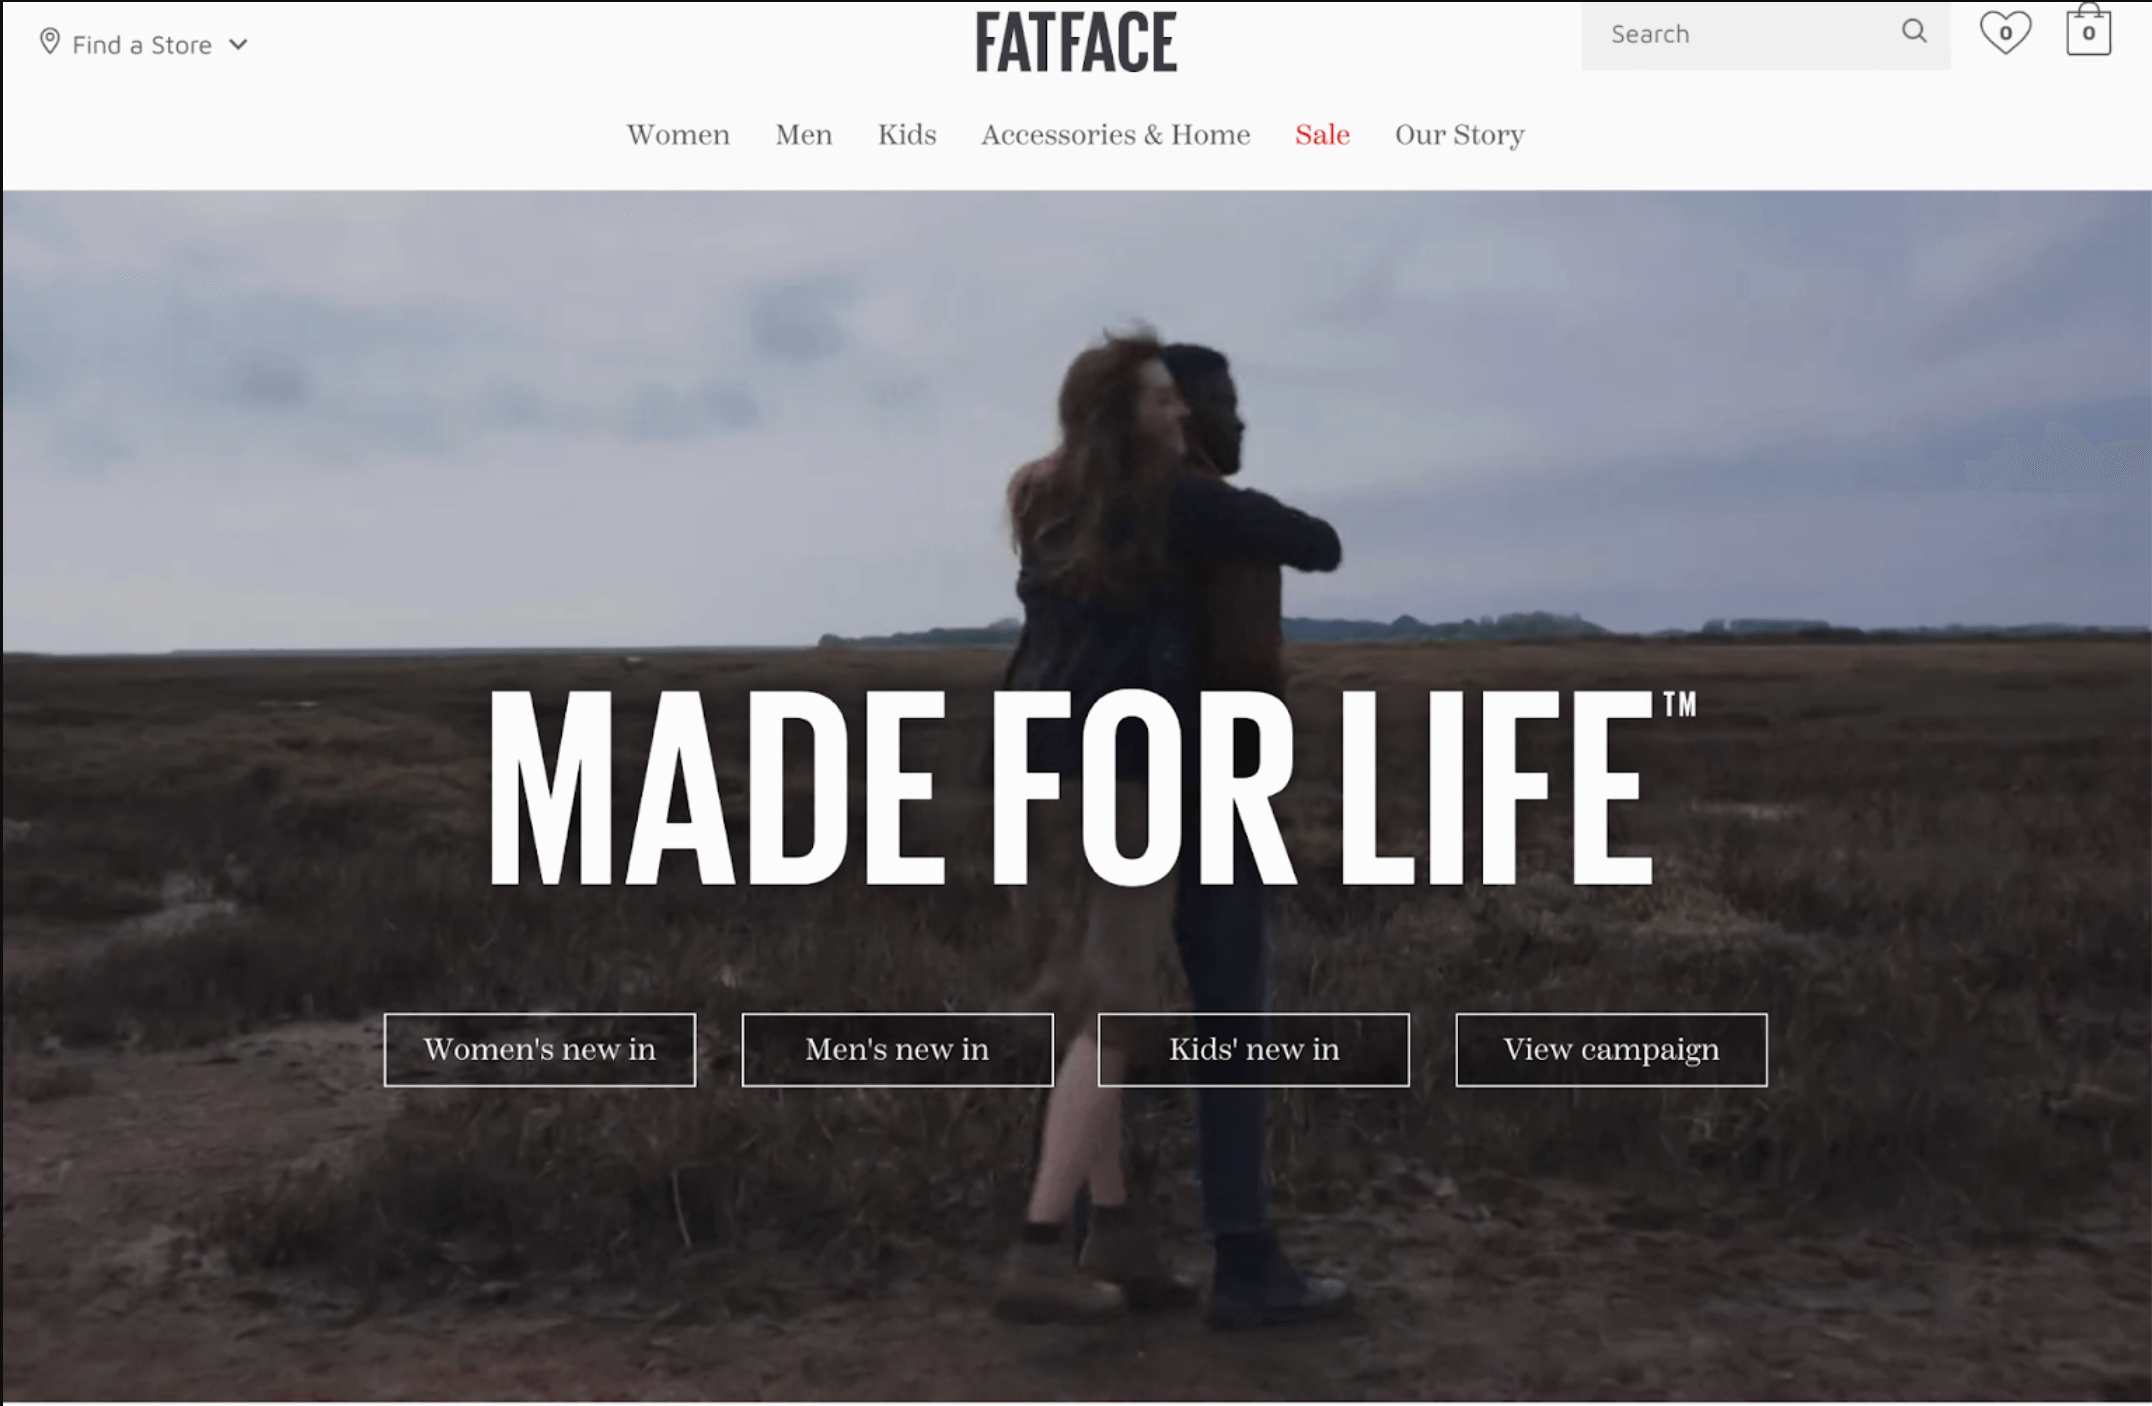 Clothing company Fatface's homepage